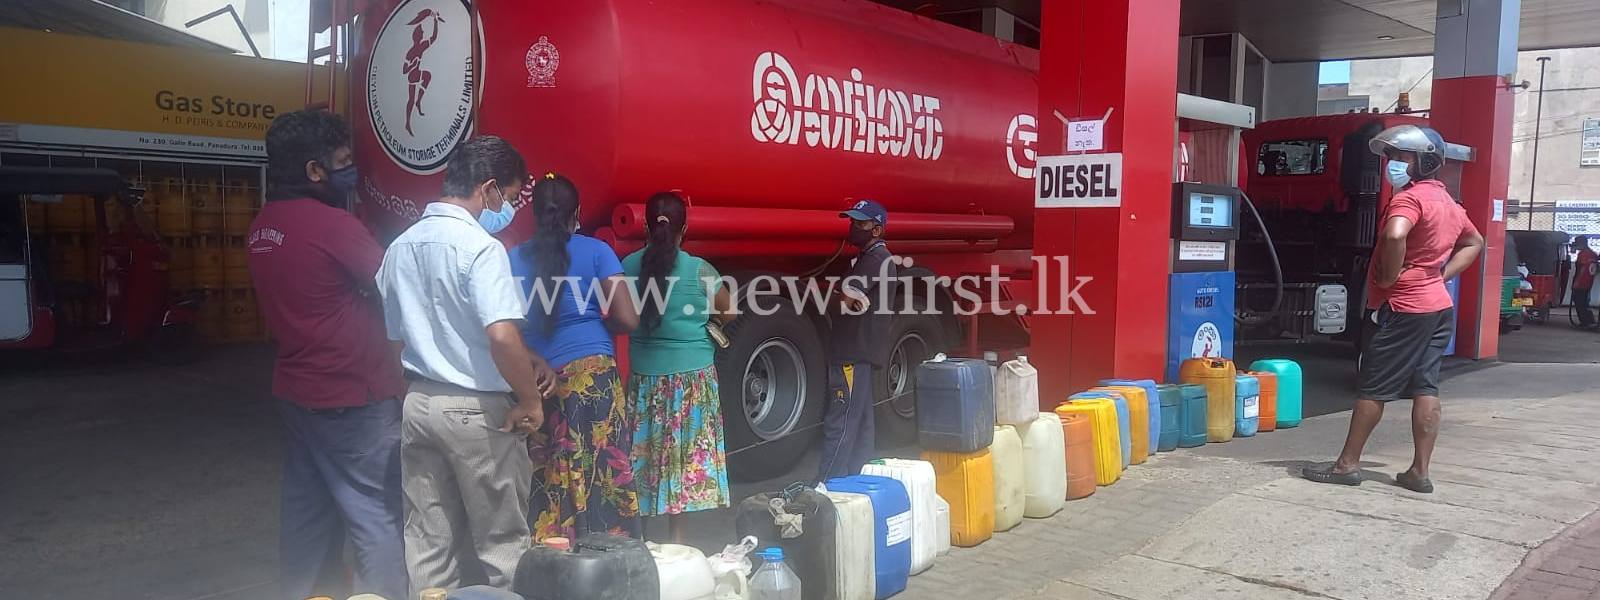 NO end to fuel queues, many wait in line